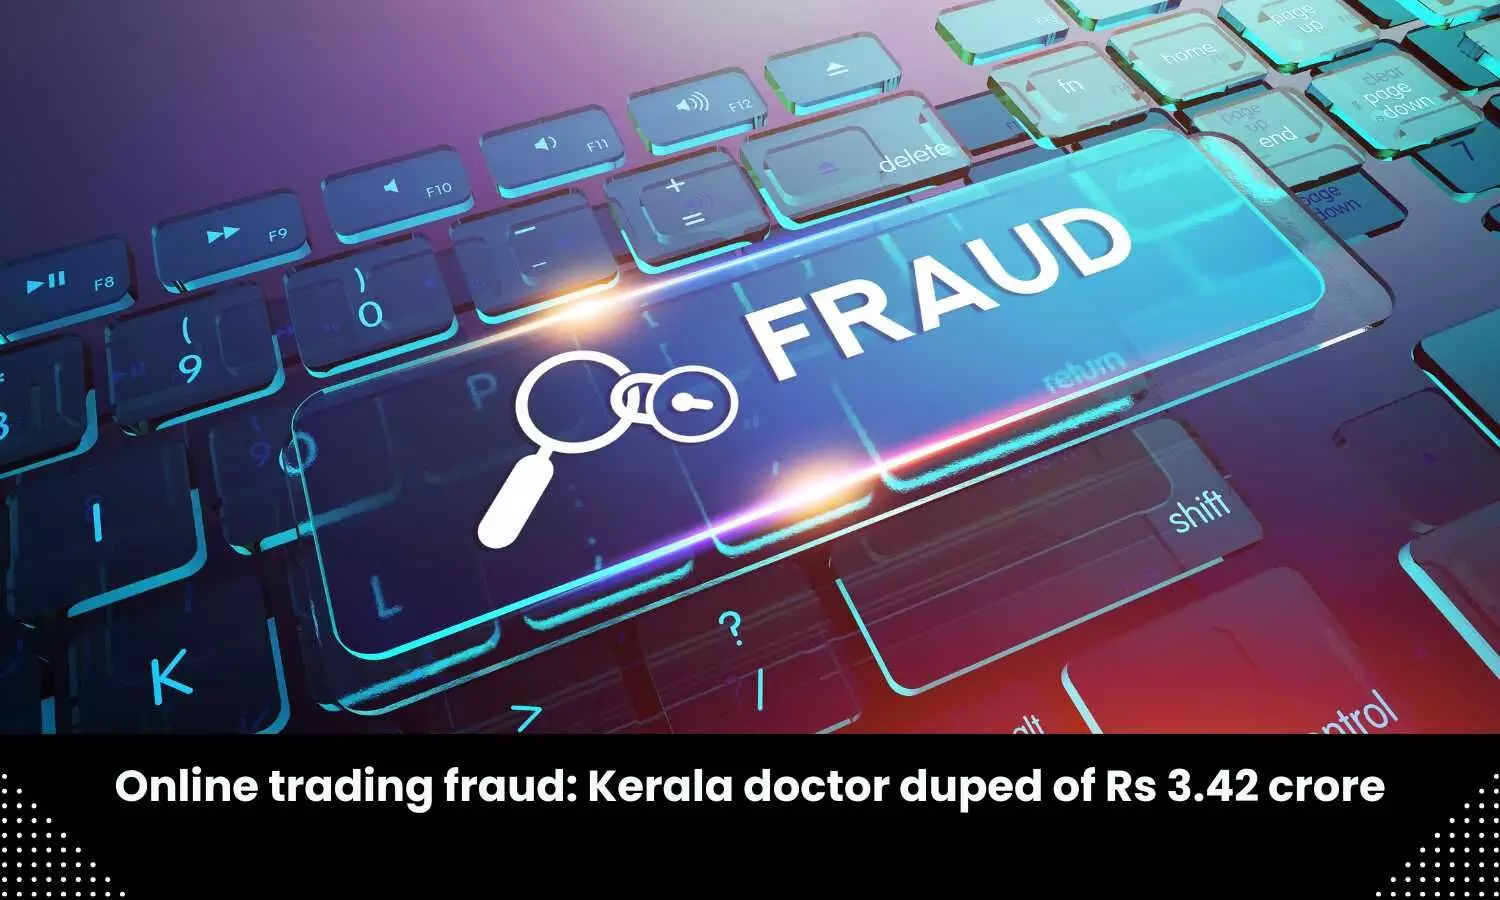 53-year-old doctor become victim of online trading and investment scam